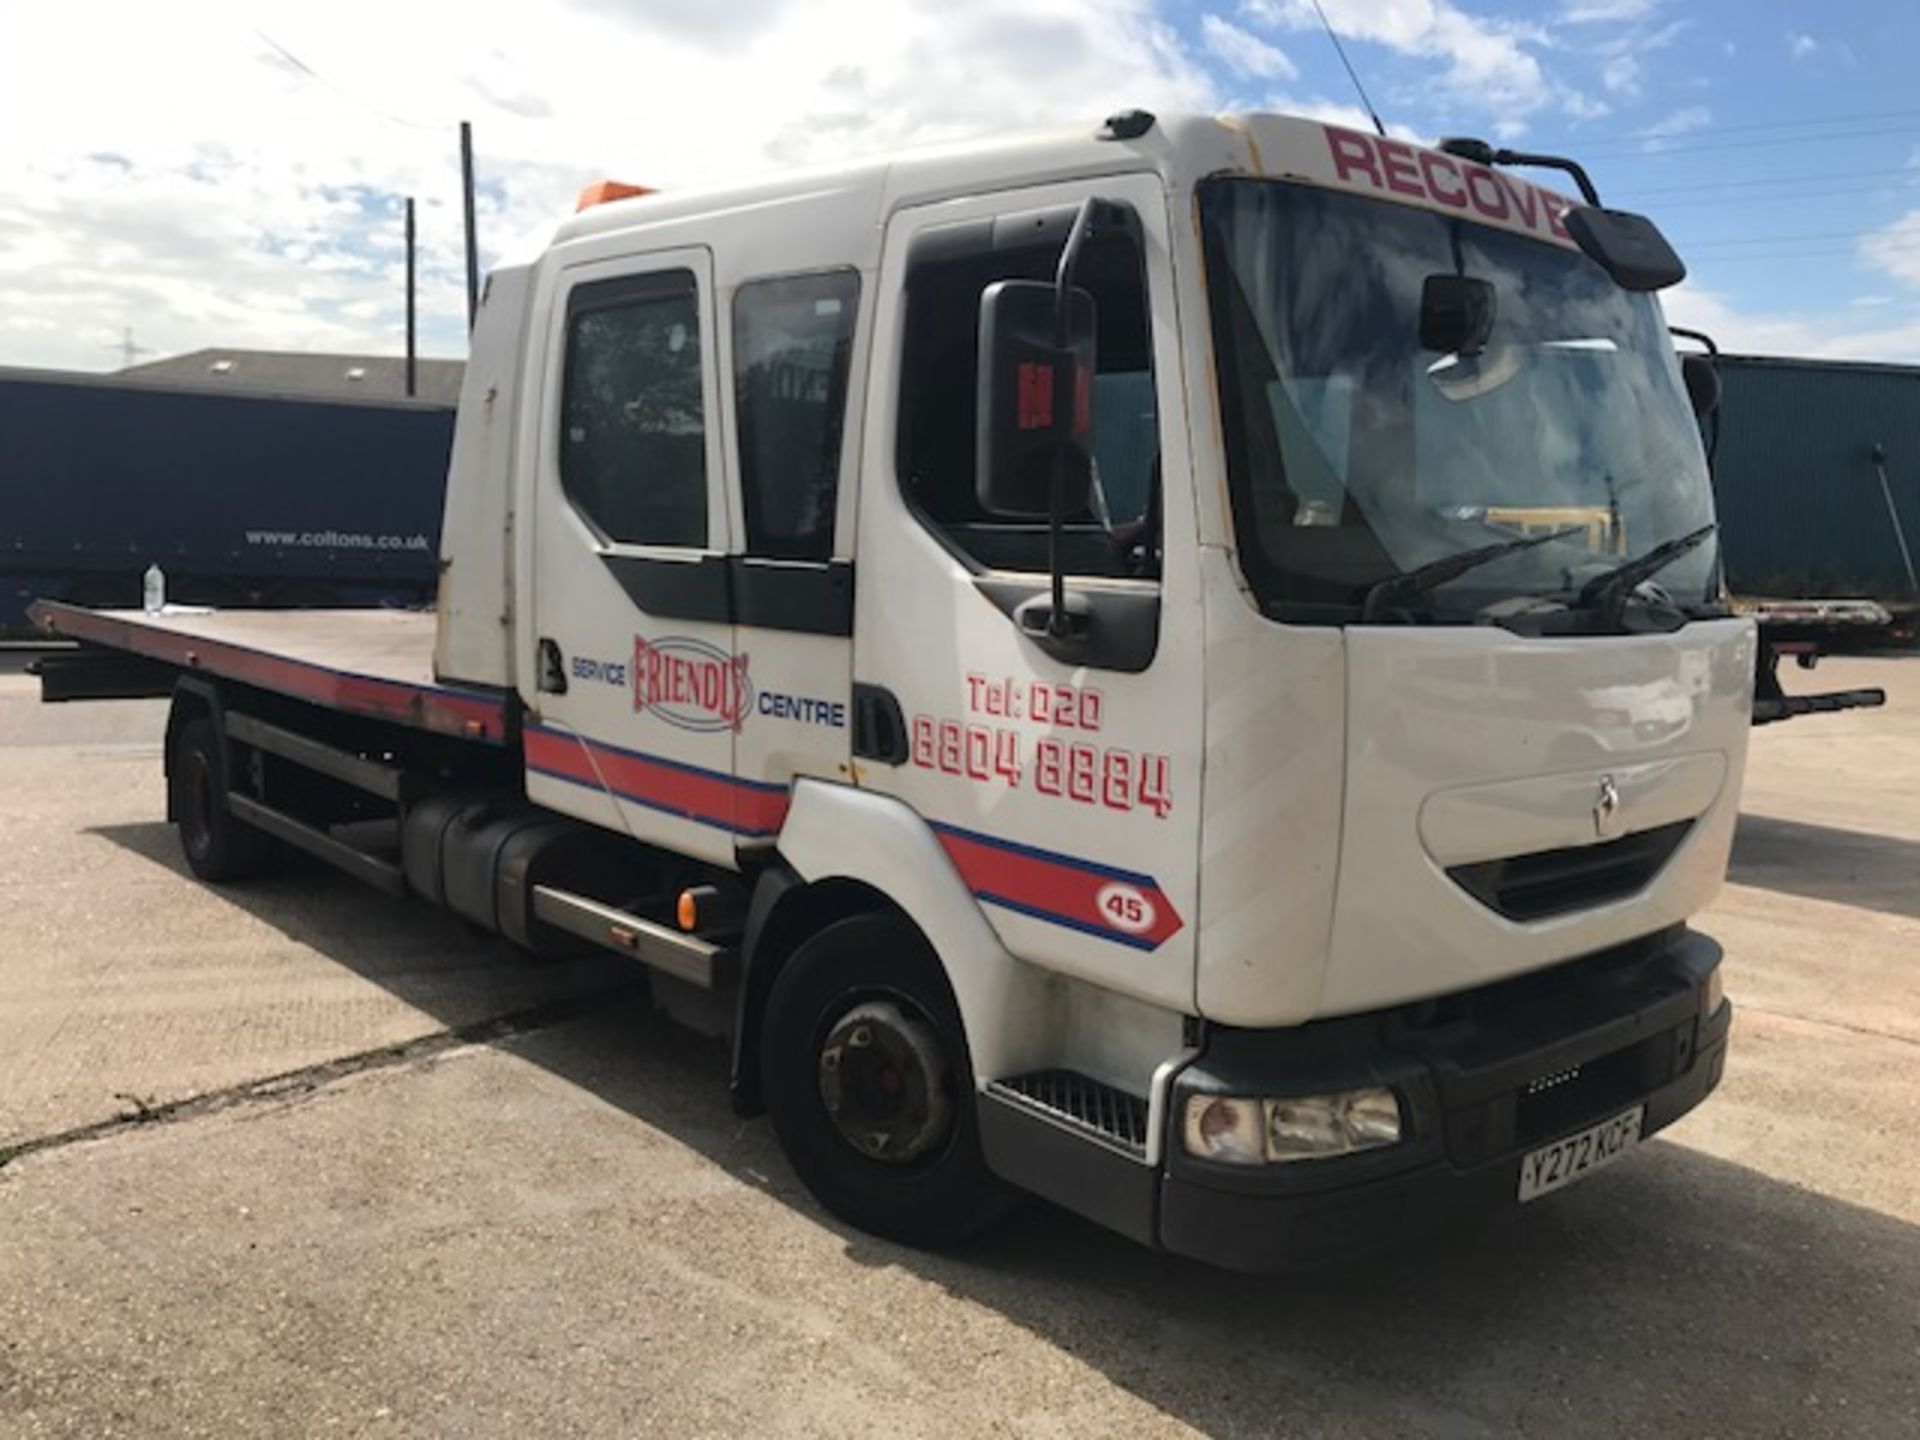 2001 Renault 10t crew cab breakdown recovery vehicle complete with Roger Dyson Group body and winch,